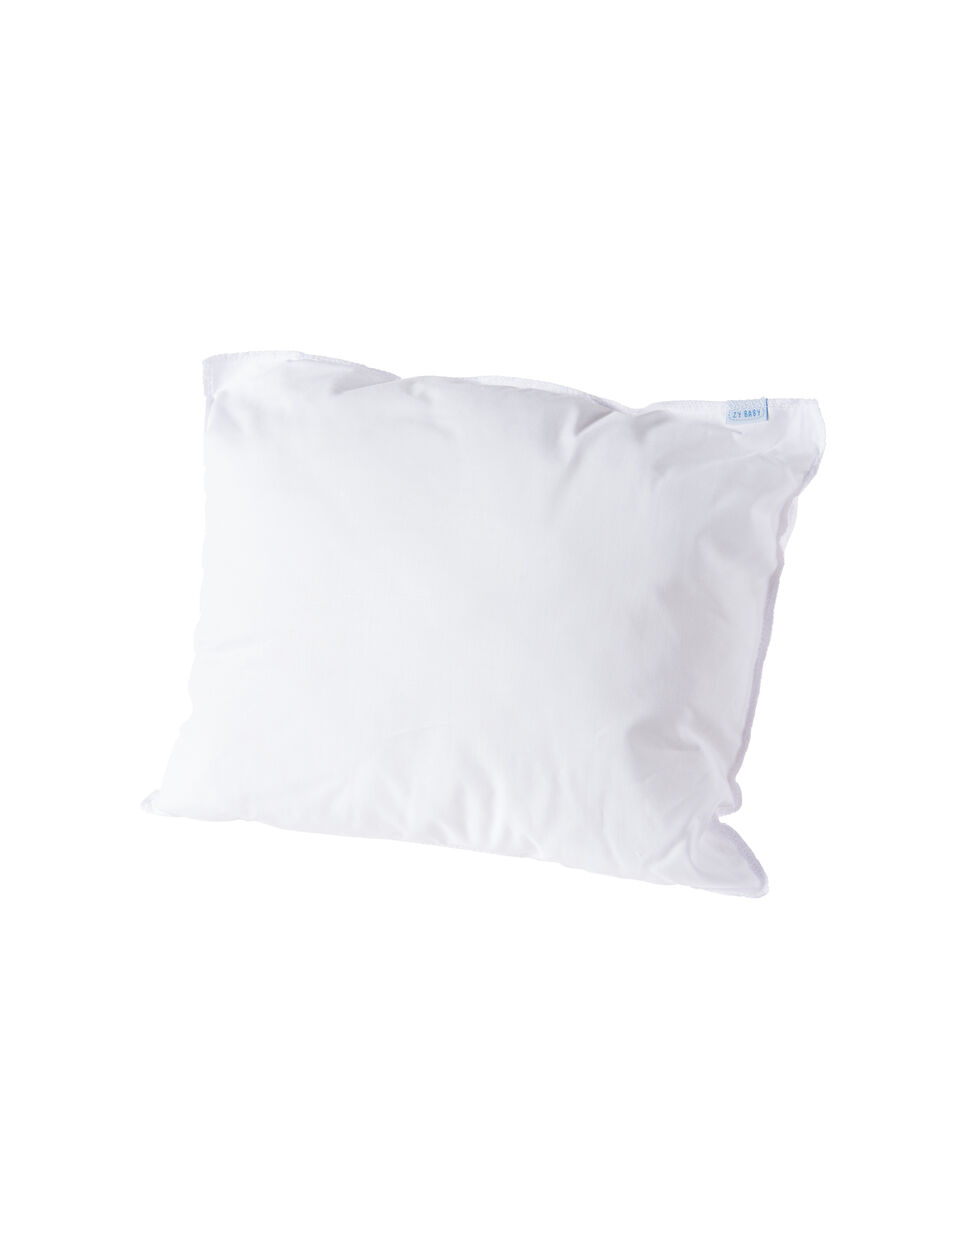 Anti-Allergy Pillow 35X27cm by Zy Baby